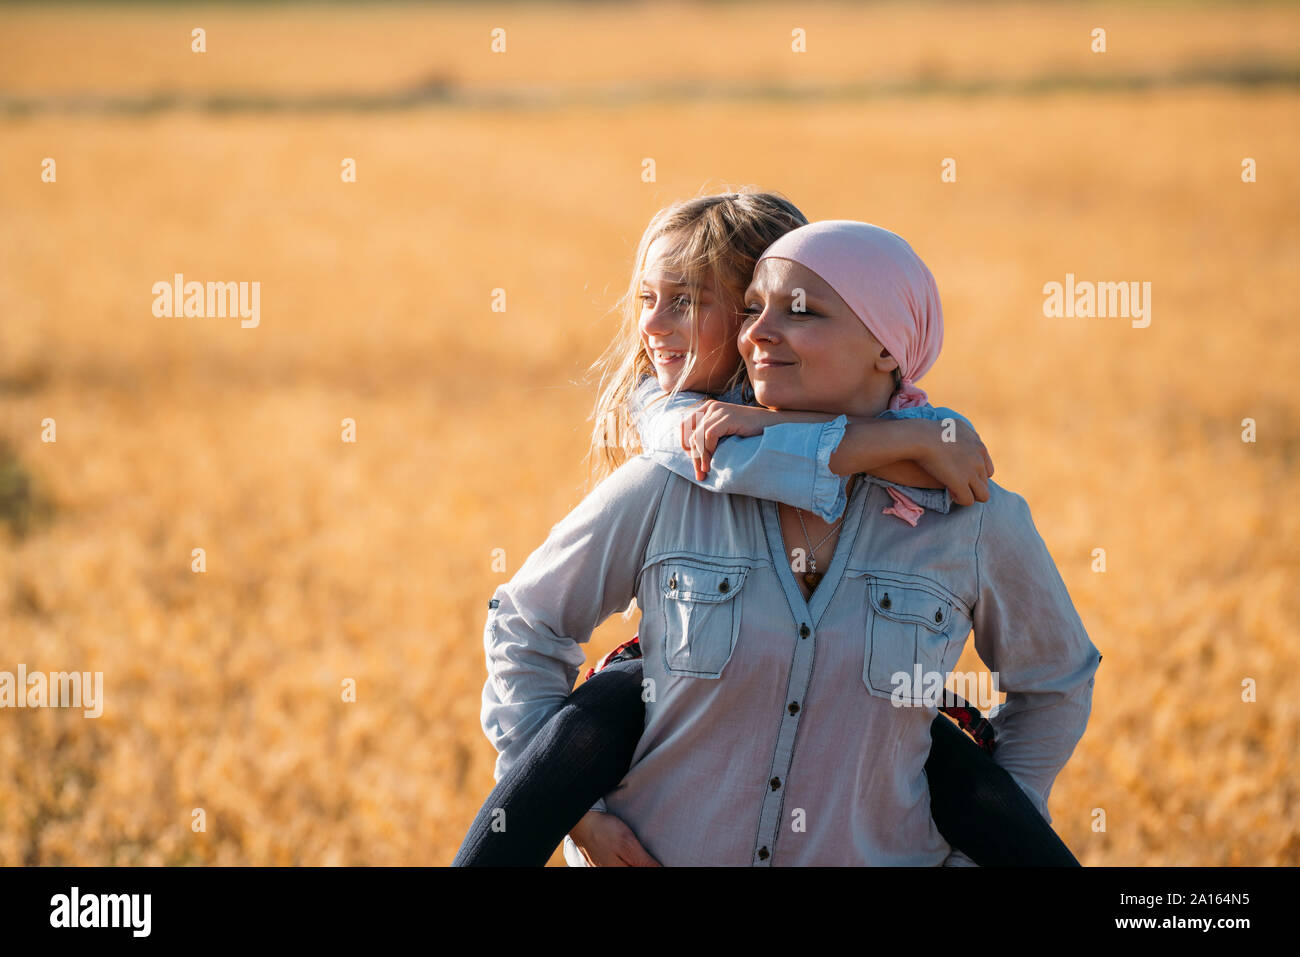 A woman with cancer carrying her daughter on her back, looking sideways Stock Photo